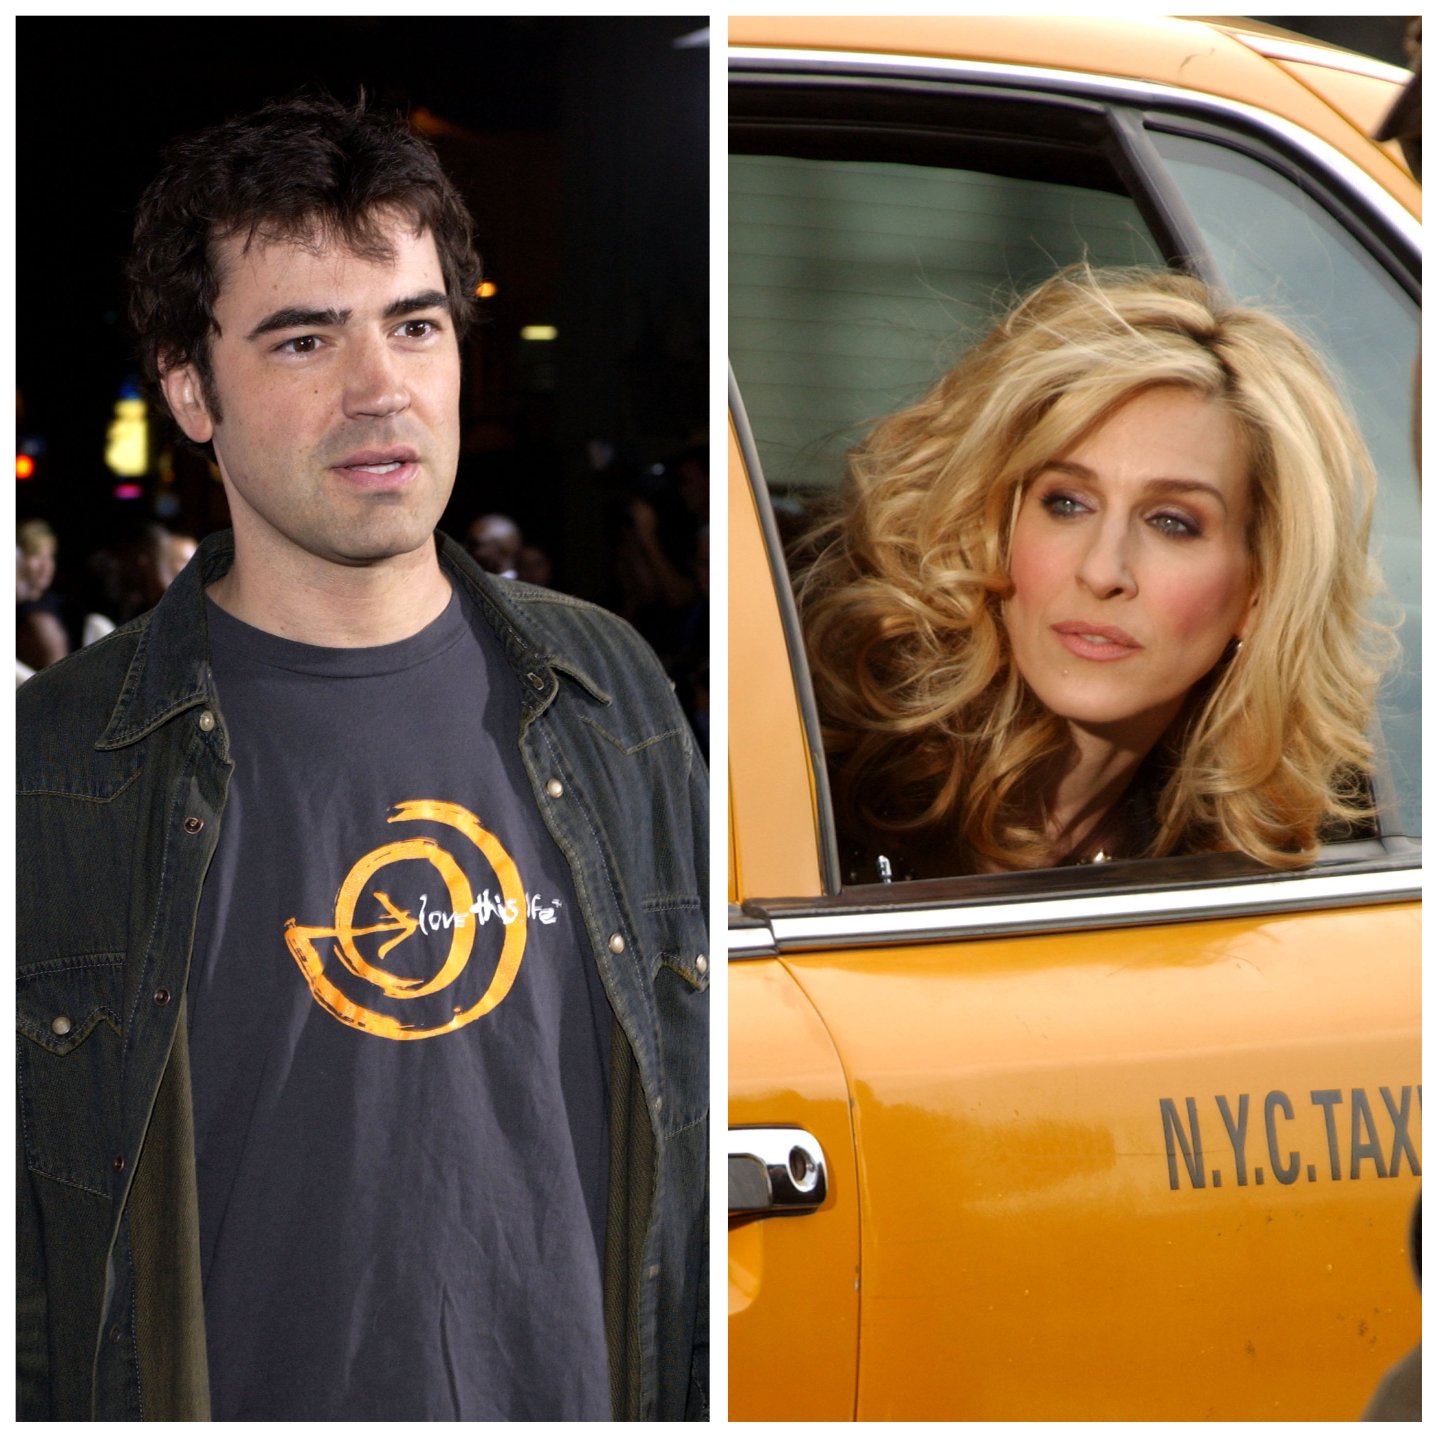 Actor Ron Livingston who played Jack Berger on 'Sex and the City' at a red carpet event. Sarah Jessica Parker looks from a cab window. 